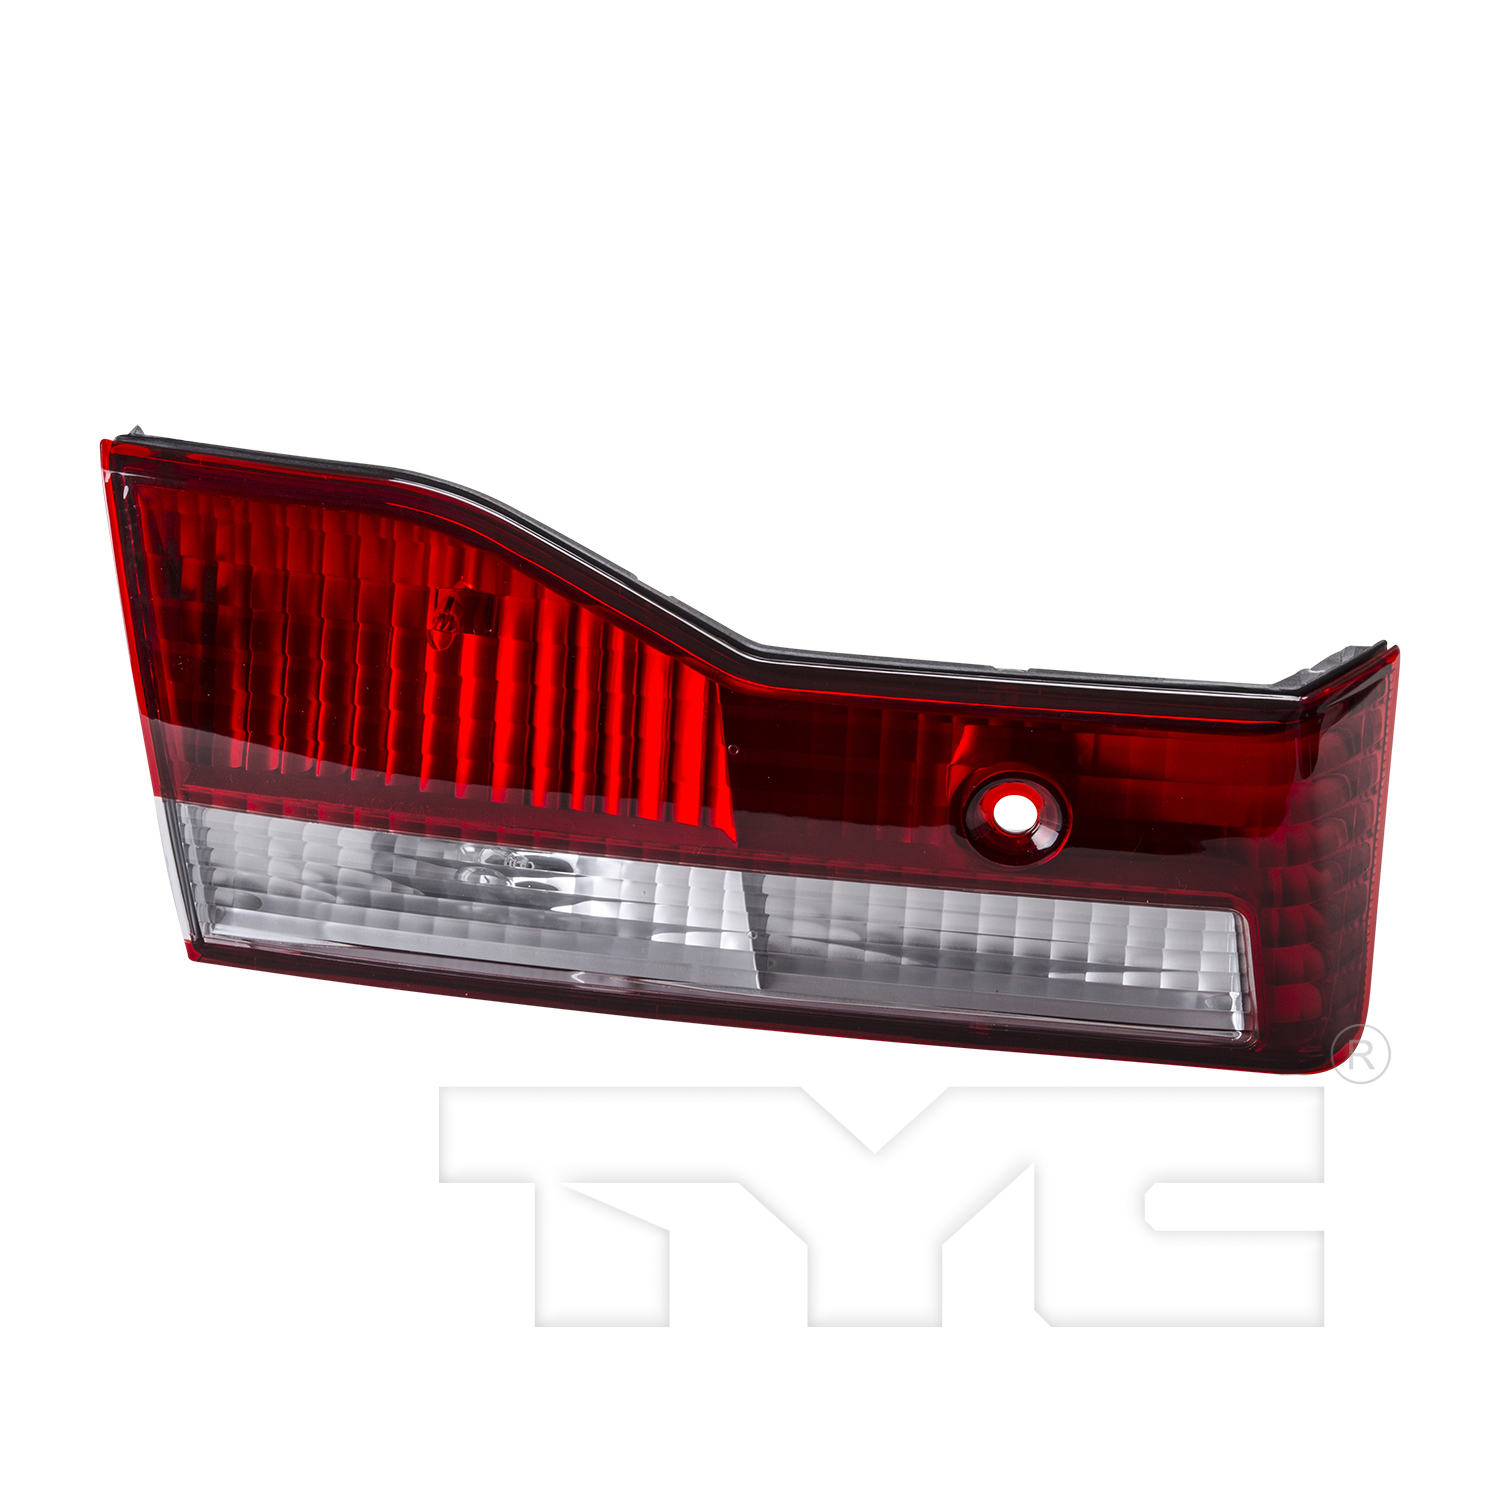 Aftermarket TAILLIGHTS for HONDA - ACCORD, ACCORD,01-02,LT Taillamp assy